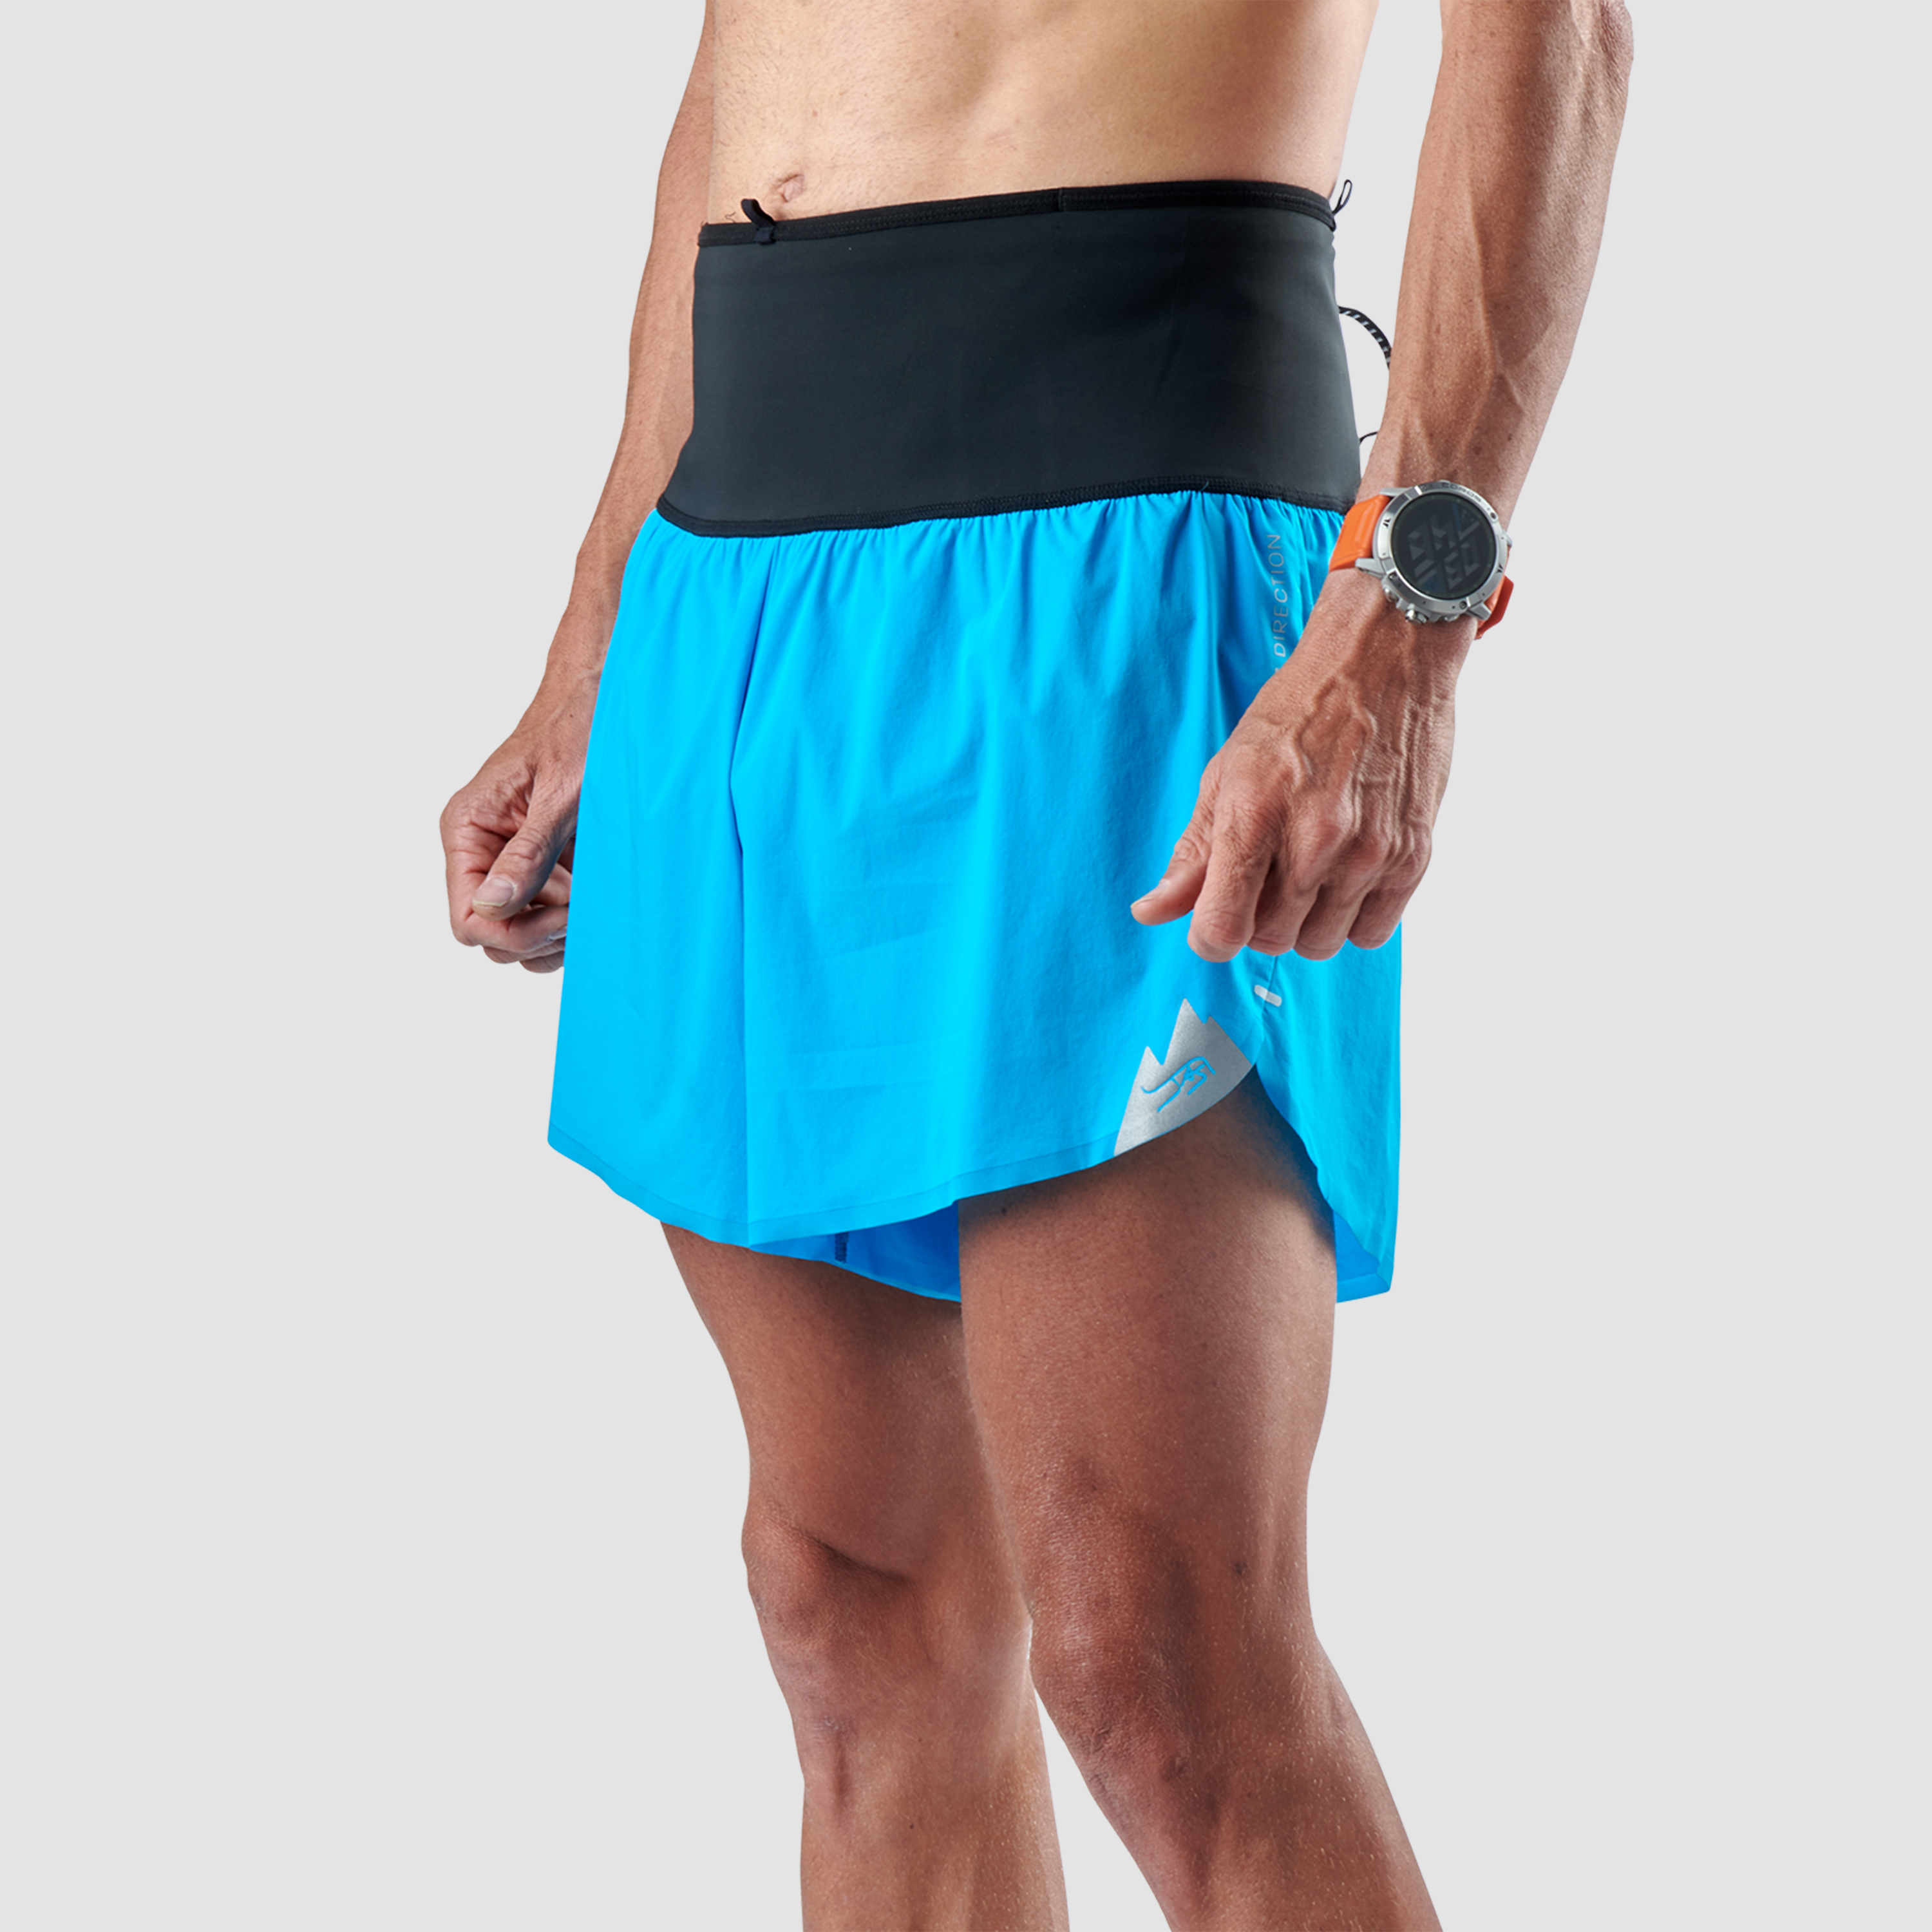 Ultimate Direction Jason Schlarb Short in Turquoise Size Small